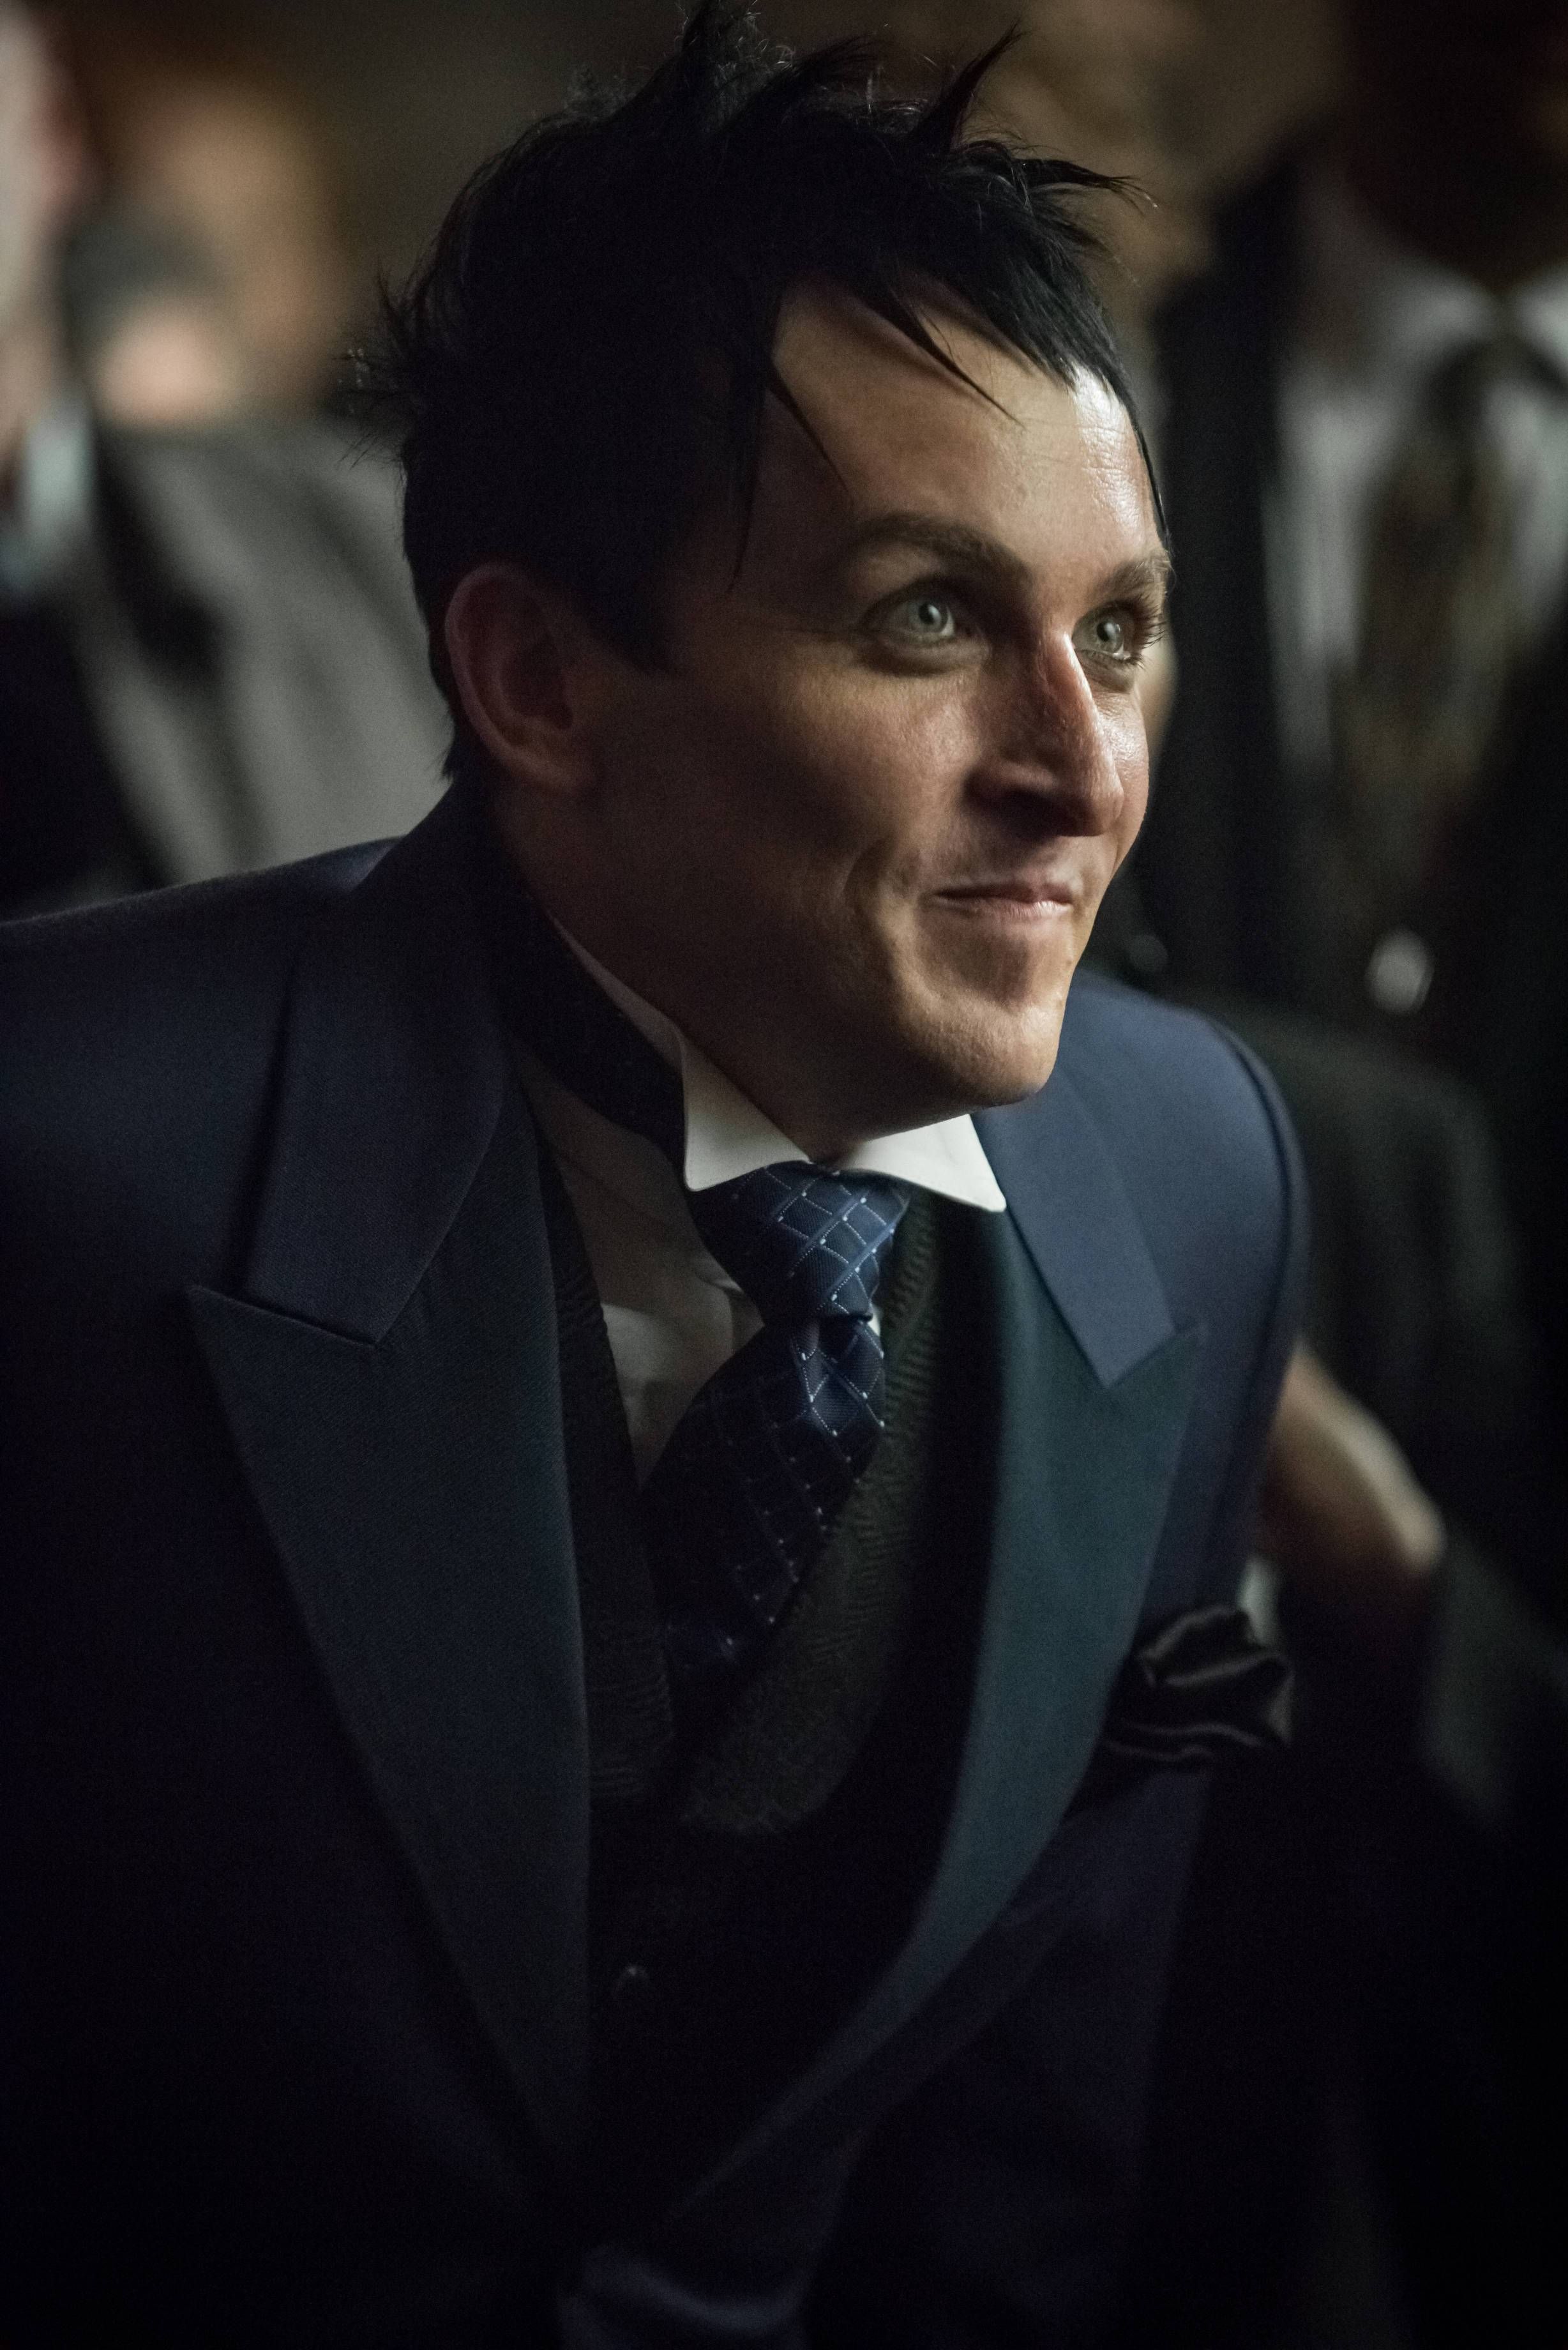 GOTHAM: Robin Lord Taylor in the ÒMad City: Better to Reign in HellÉÓ season premiere episode of GOTHAM airing airing Monday, Sept. 19 (8:00-9:01 PM ET/PT) on FOX. ©2015 Fox Broadcasting Co. Cr: Jeff Neumann/FOX.